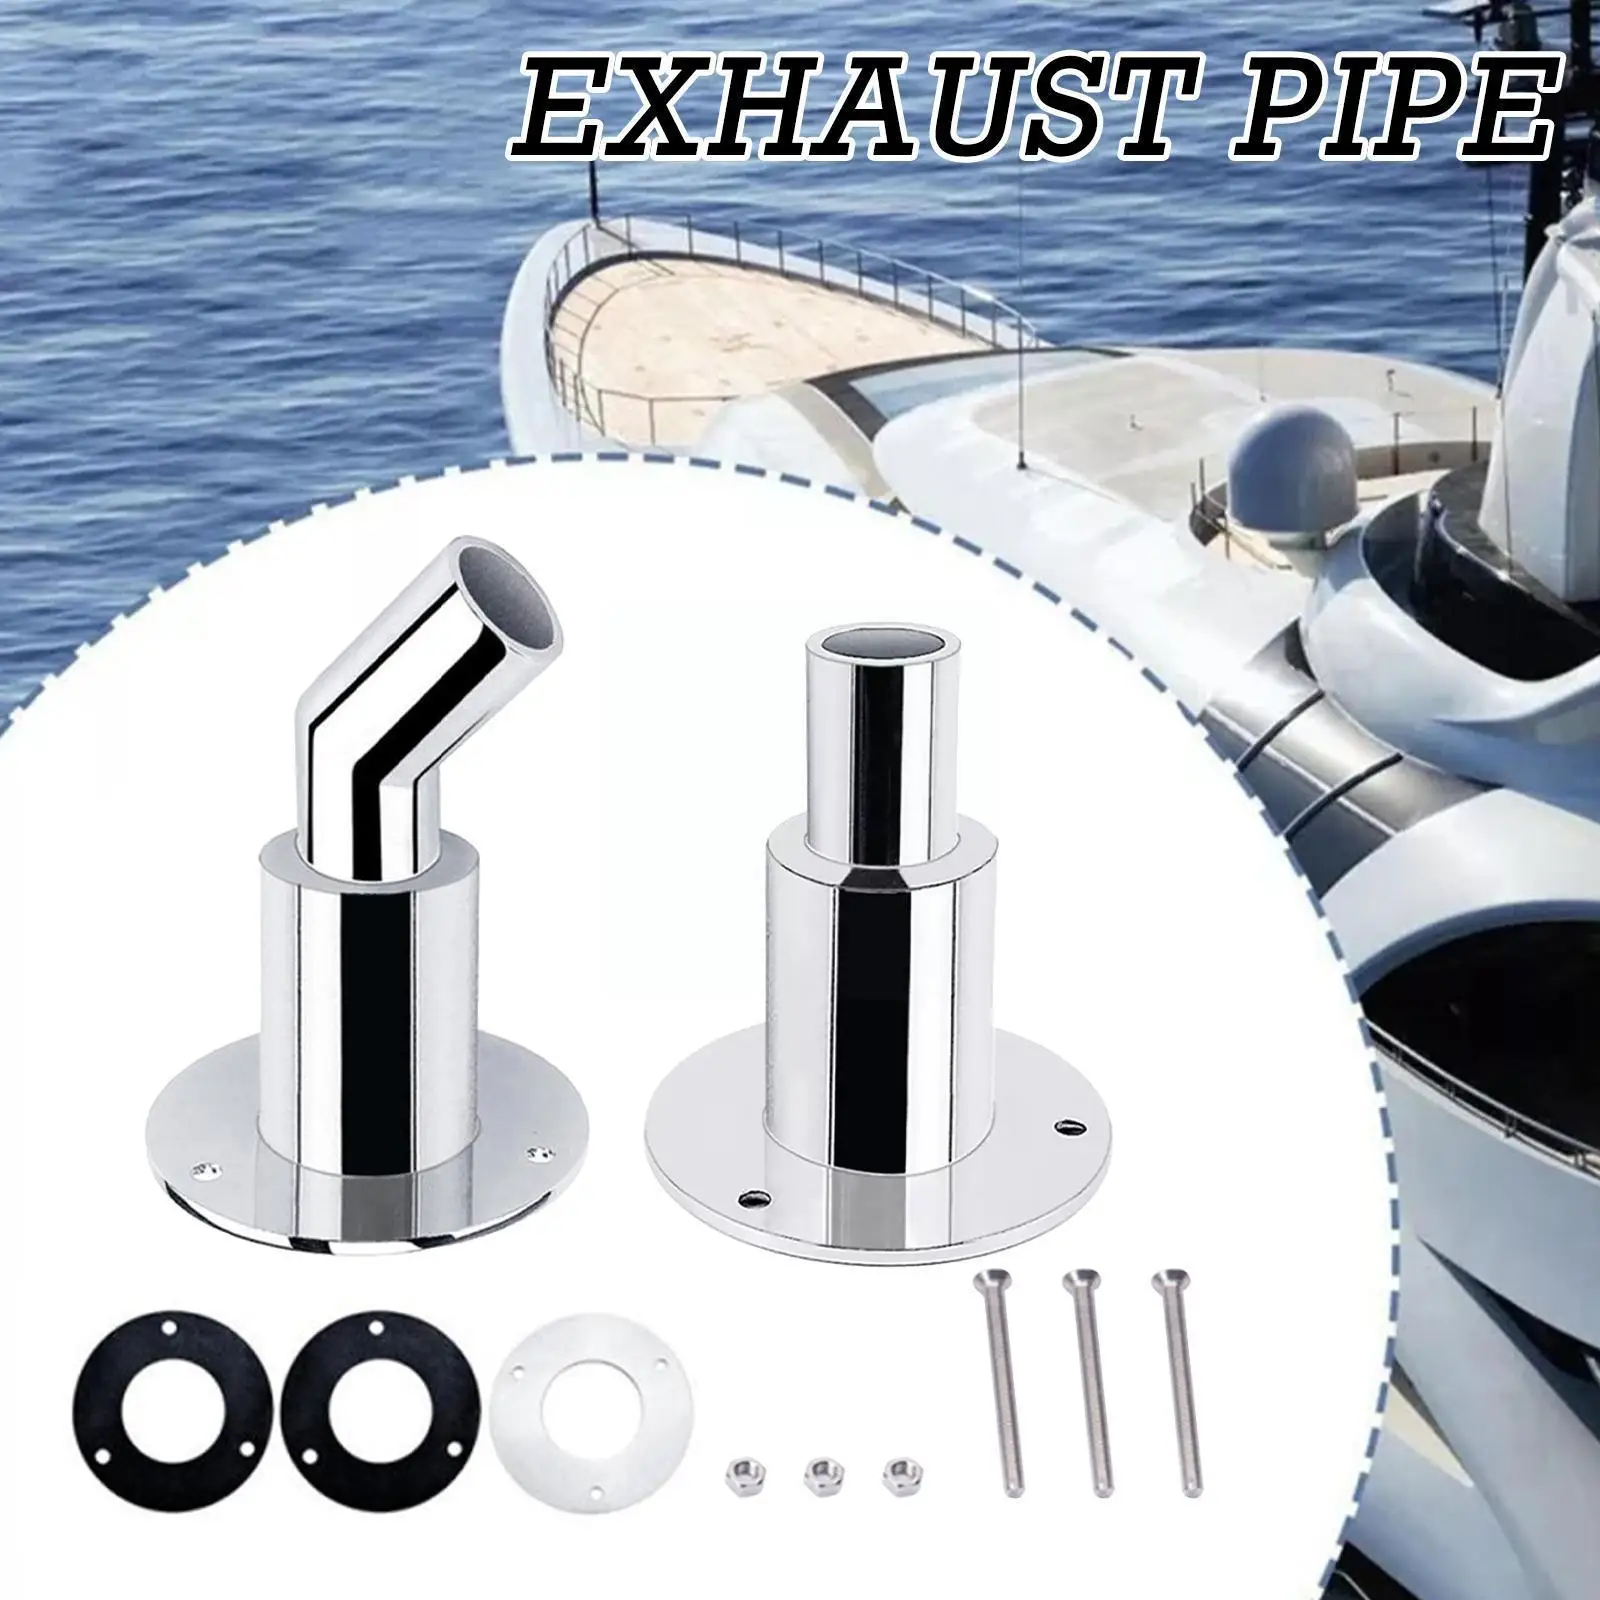 Steel Parking Heater Exhaust Fitting Adapter Thru Hardware Of Exhaust Heater Hull Pipe Socket Part For Tube F2o8 stainless steel 316 thru hull exhaust fitting tube pipe socket hardware part of air diesel heater for boat truck